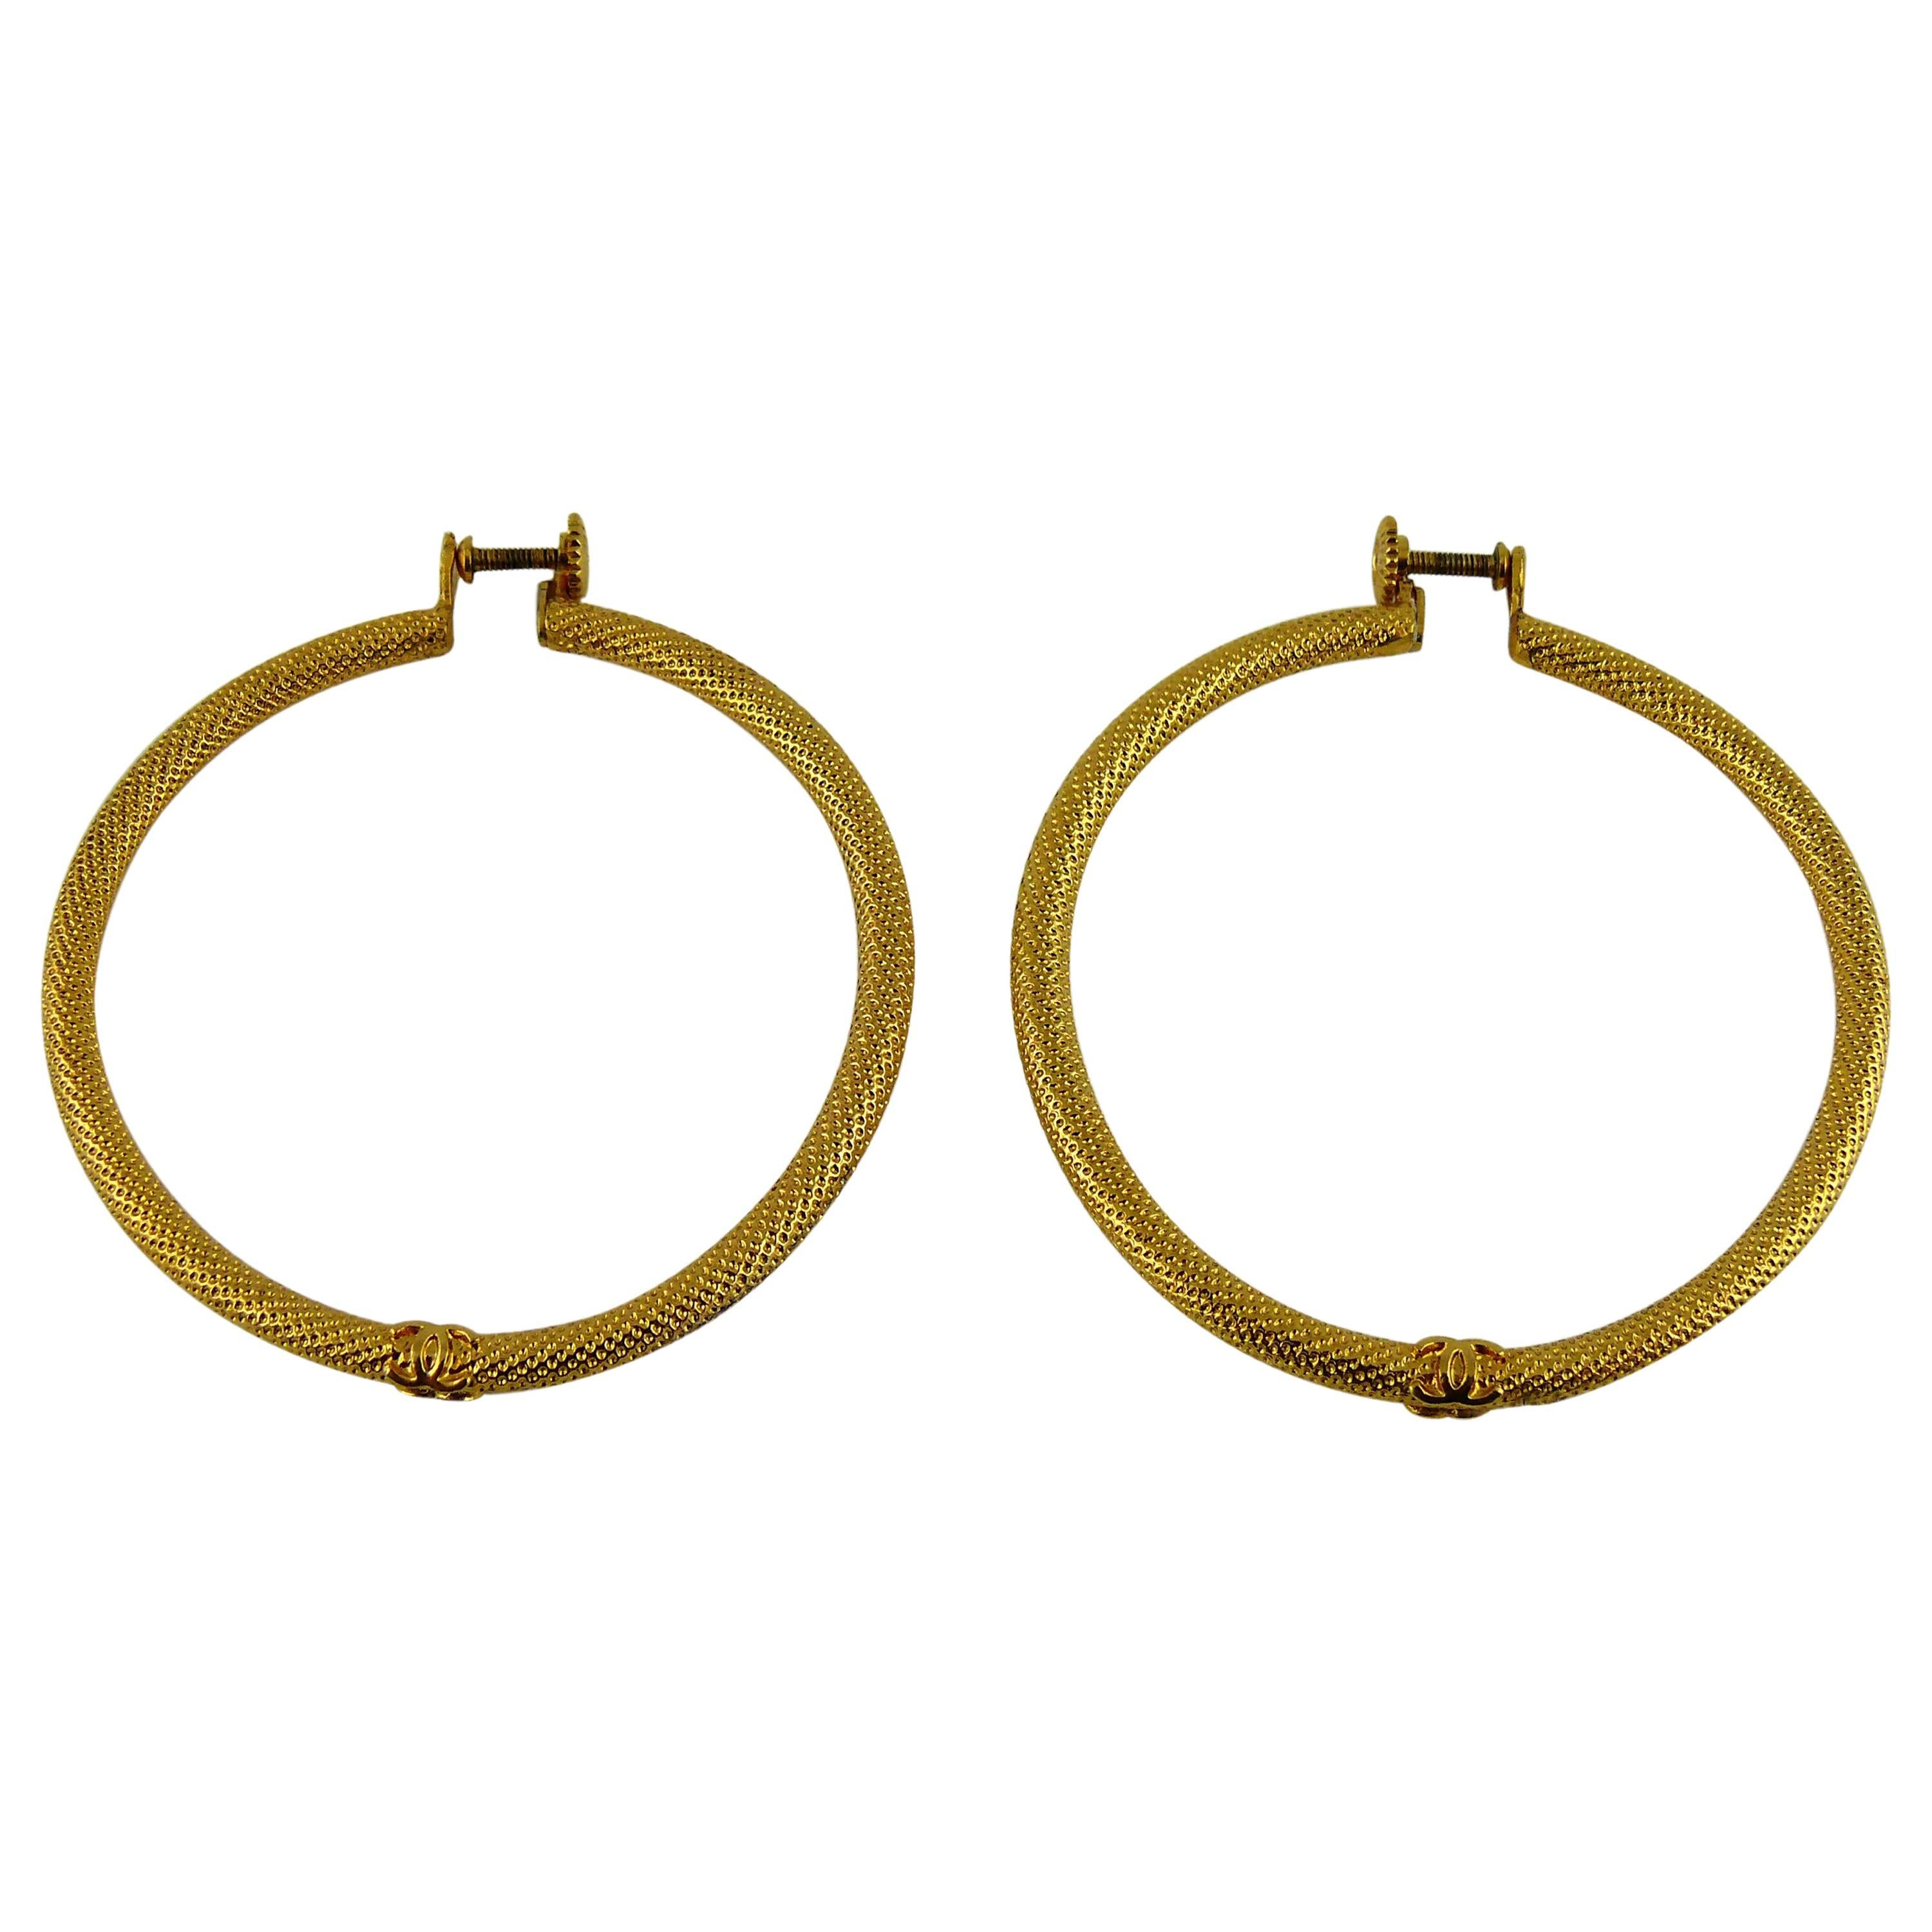 Chanel Vintage Gold Toned Hoop Earrings 1996 Fall Collection